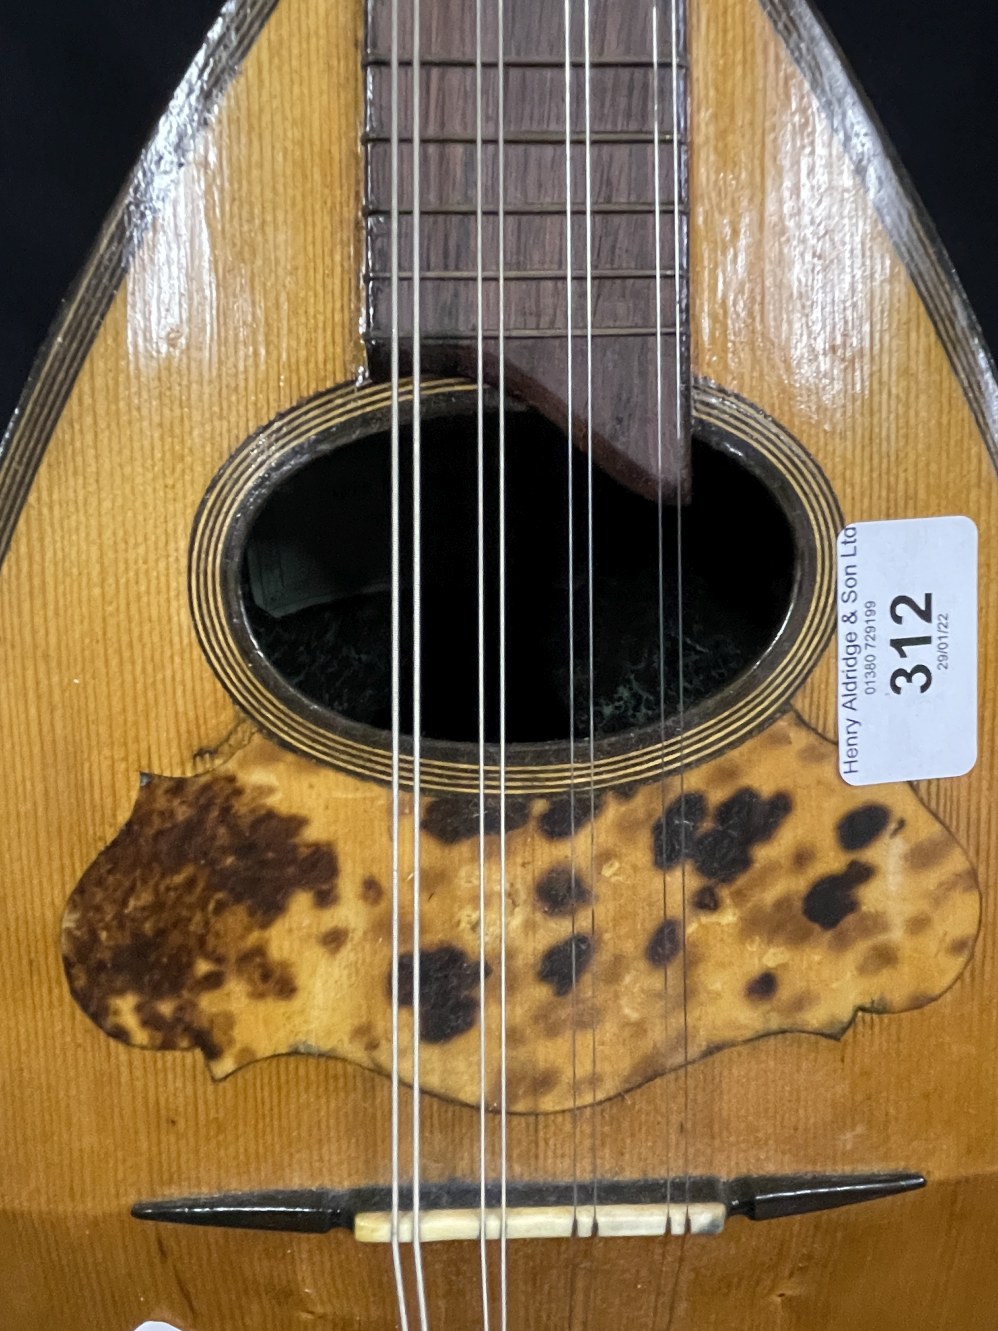 Musical Instruments: Early 20th cent. Italian mandolin by Francesco Perretti & Figli. Bowl back with - Image 2 of 3